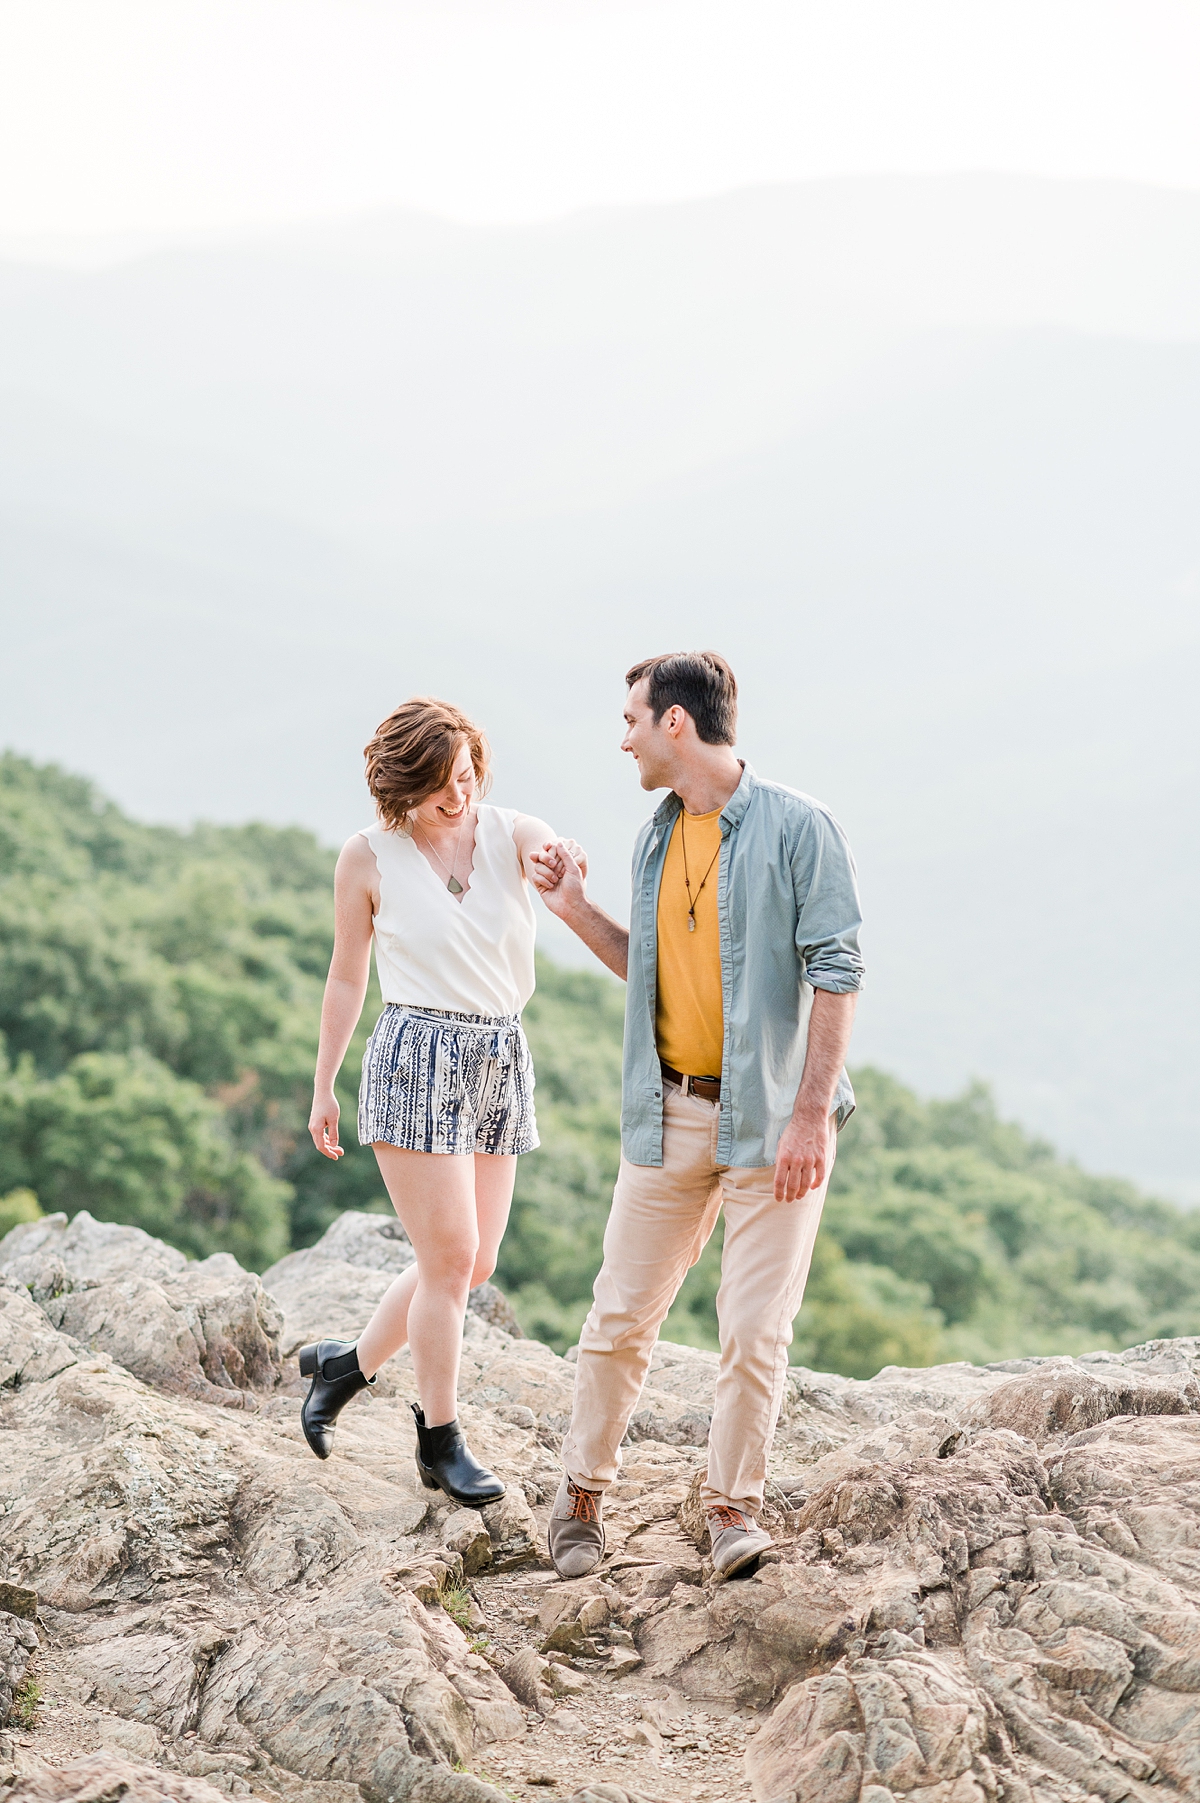 Raven's Roost Overlook Engagement Session